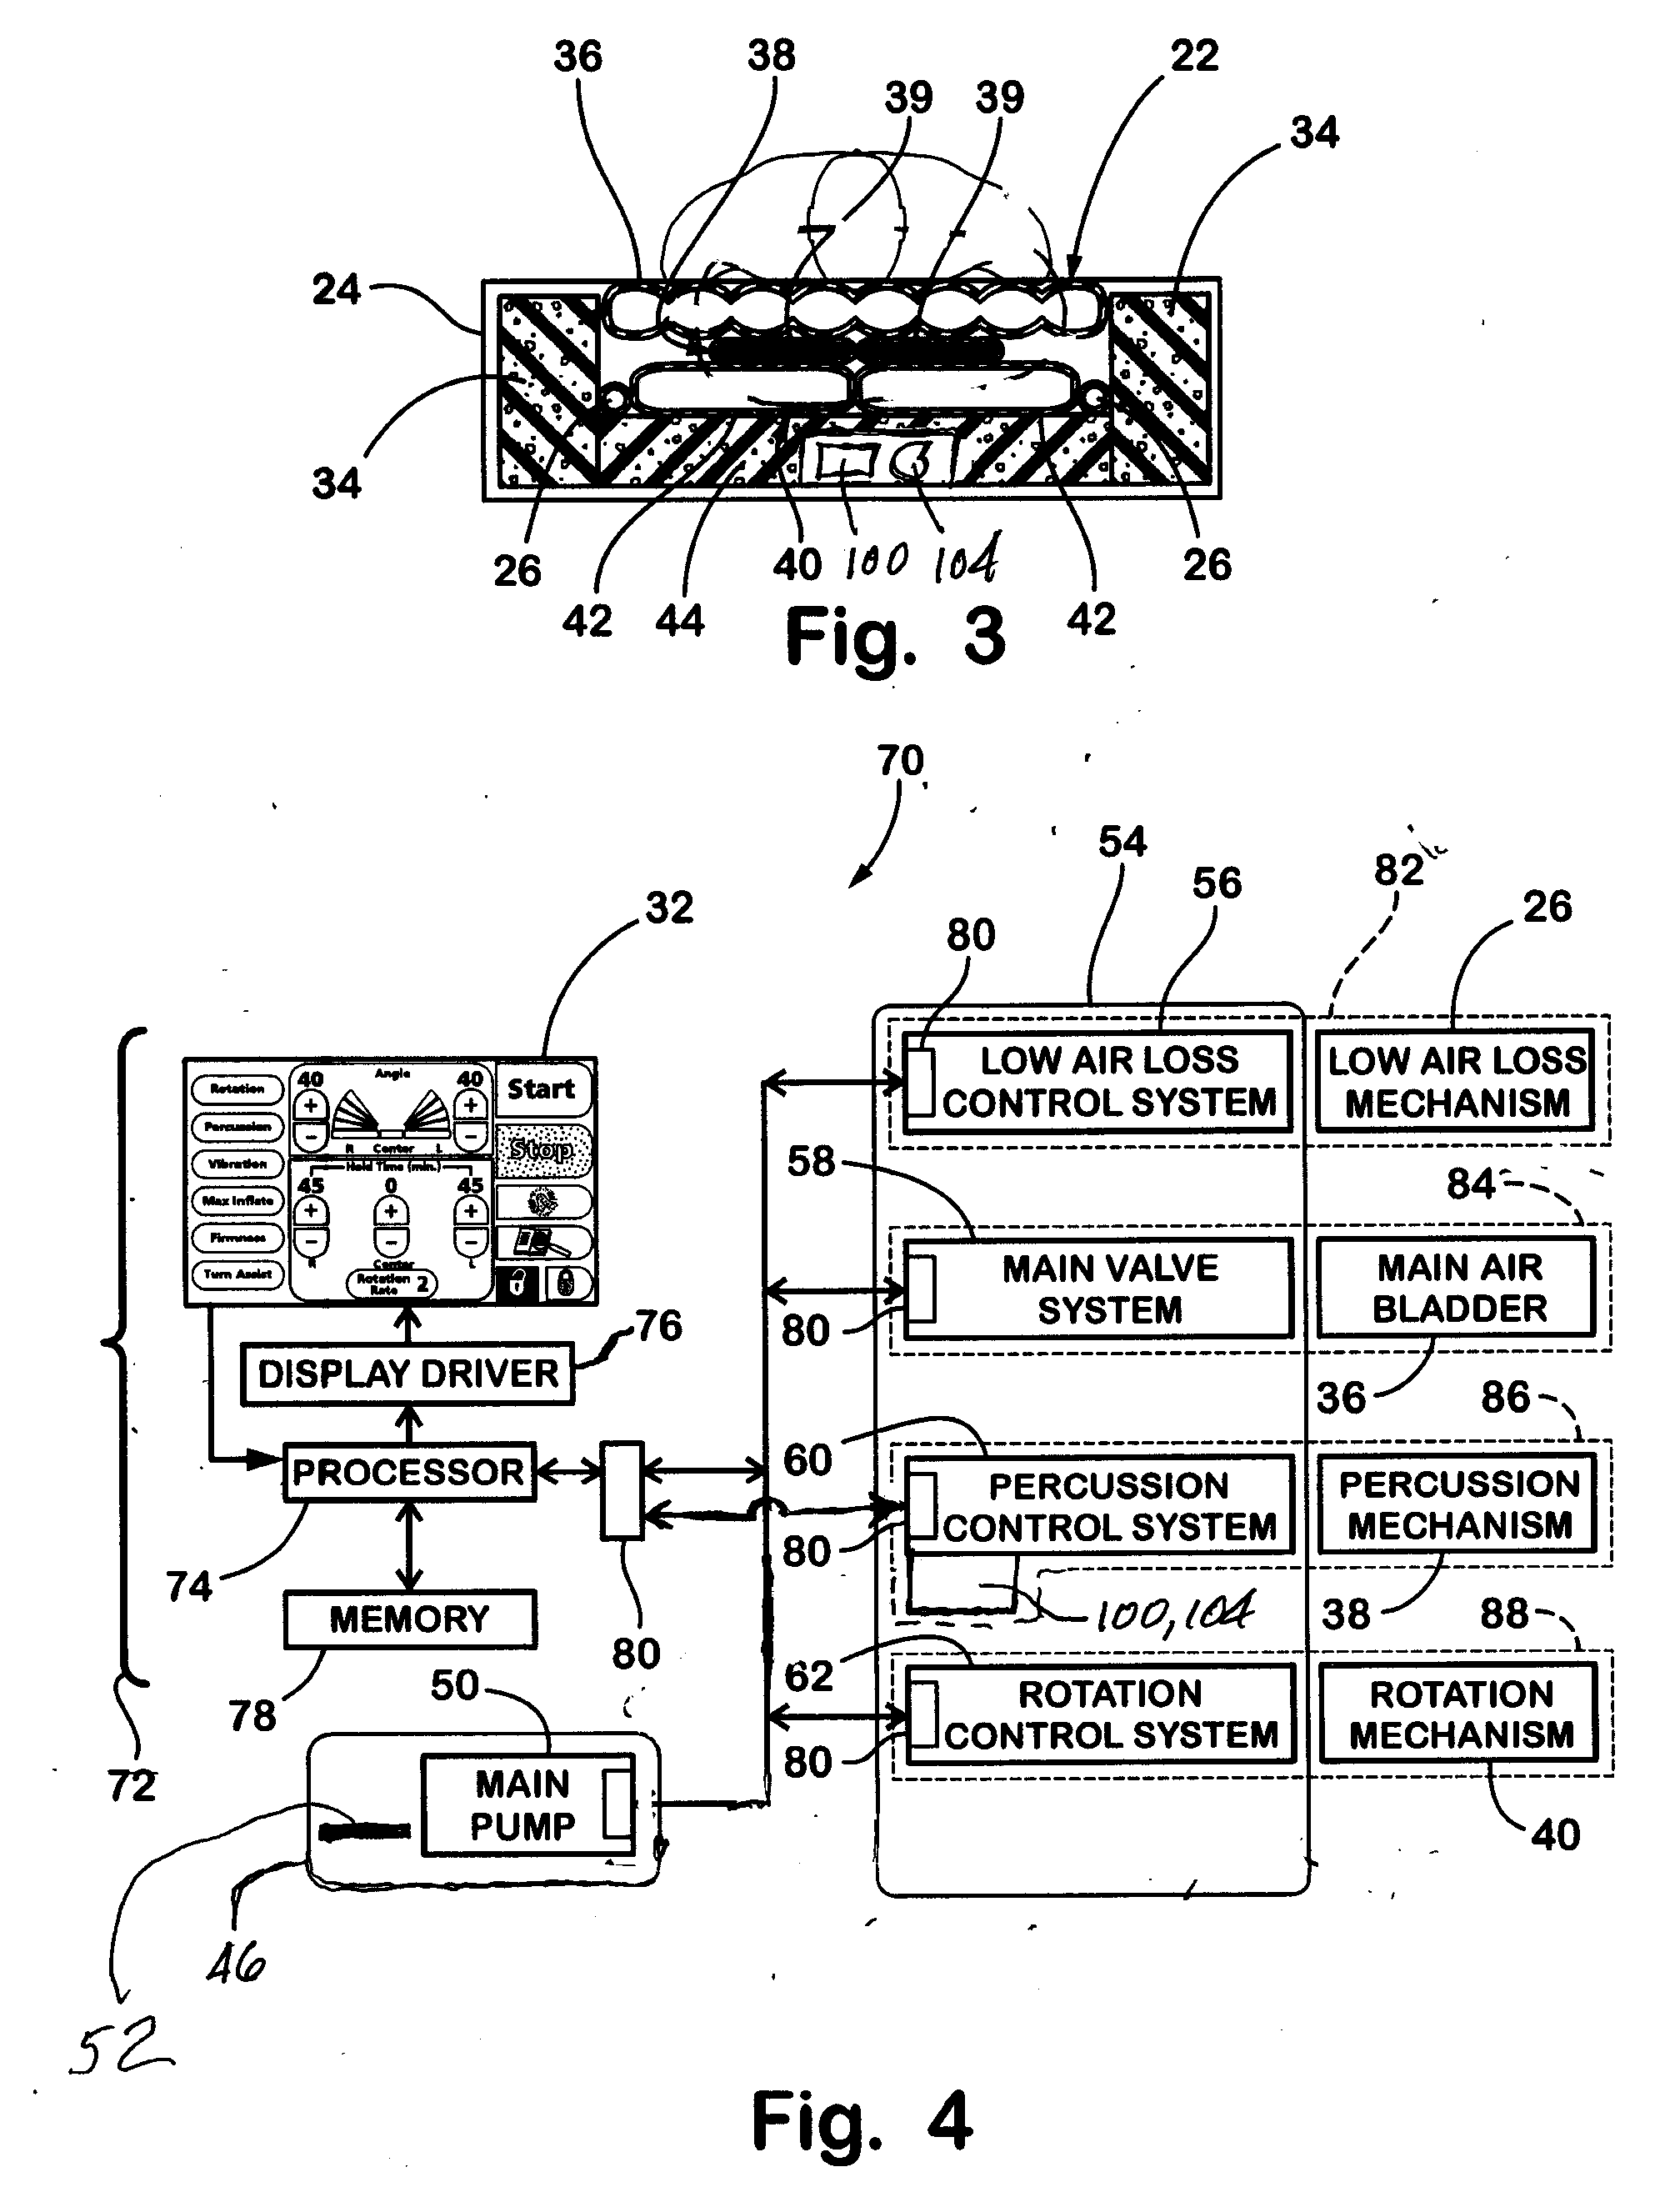 Vibrating patient support apparatus with a spring loaded percussion device